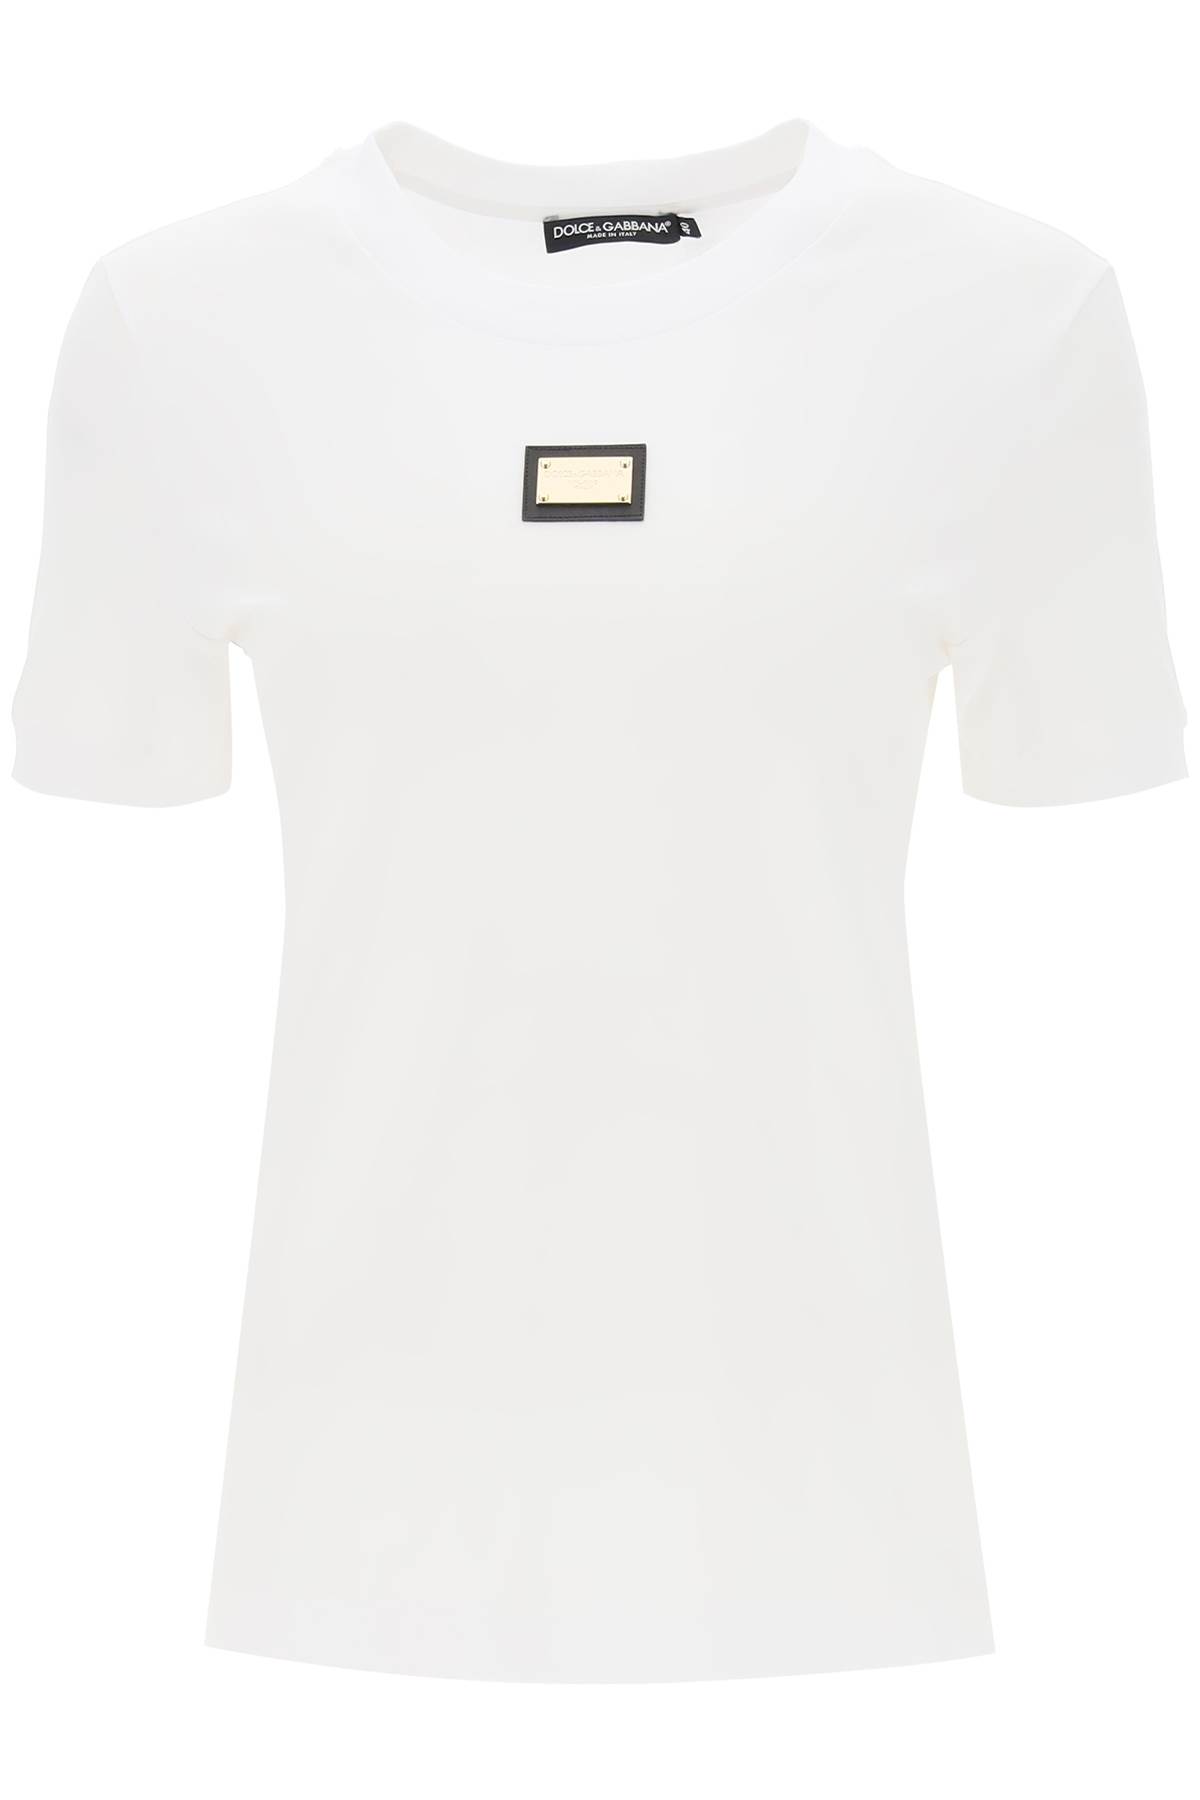 Dolce & Gabbana T-shirt With Logoed Metal Plaque In White